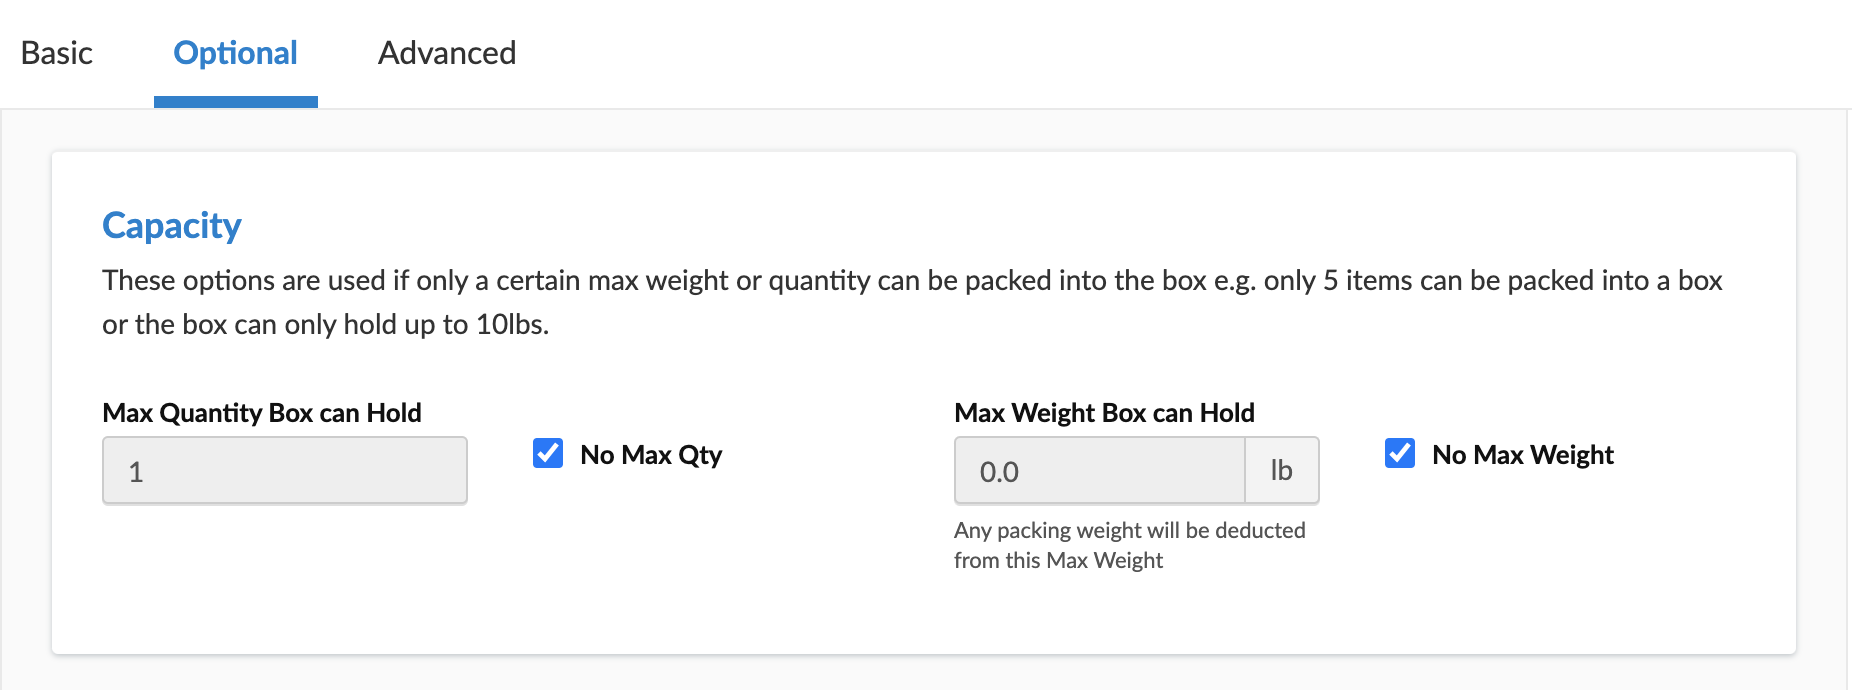 Box capacity related additional settings to be entered in Optional tab.